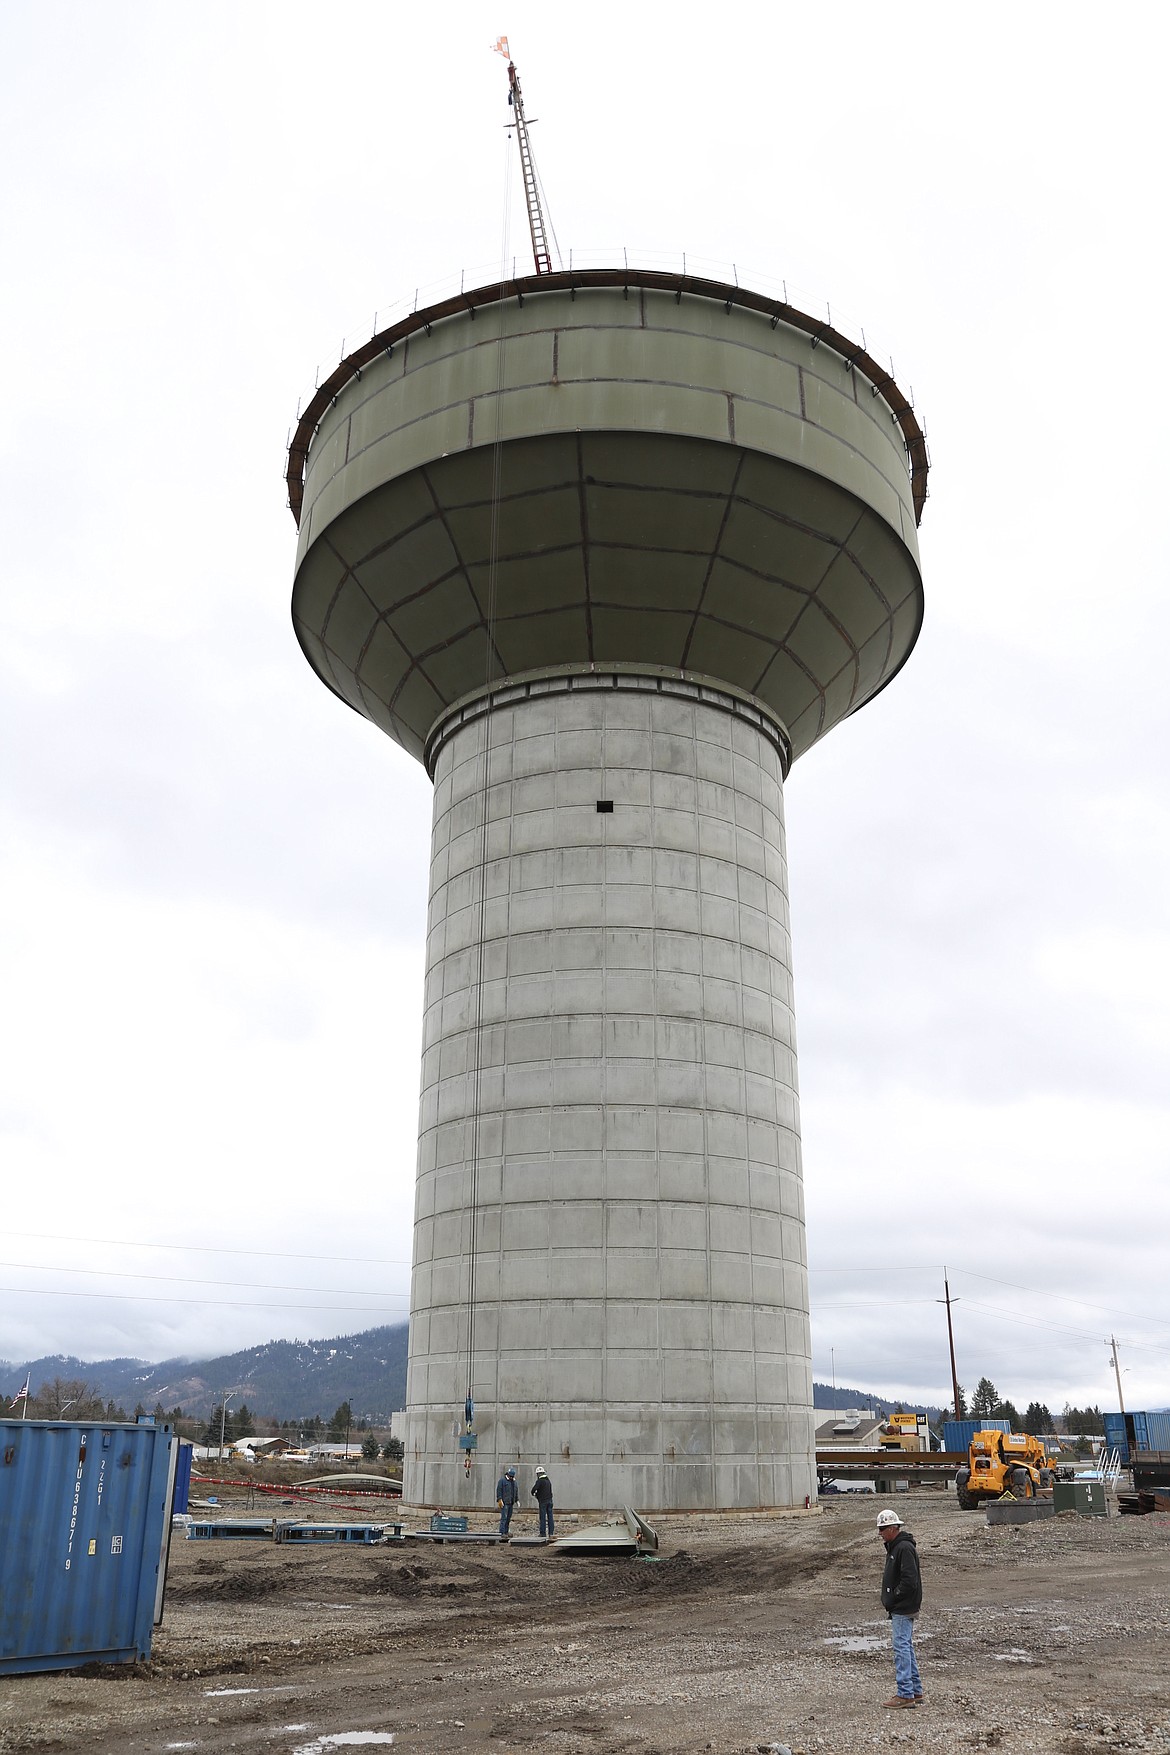 The new 2 million gallon water tank for the Hayden Lake Irrigation District was lifted to the top of the water tower on Friday morning. The water tower will be 161 foot tall at the top when completed. Keith Mead of Chicago Bridge and Iron stands in the foreground. HANNAH NEFF/Press